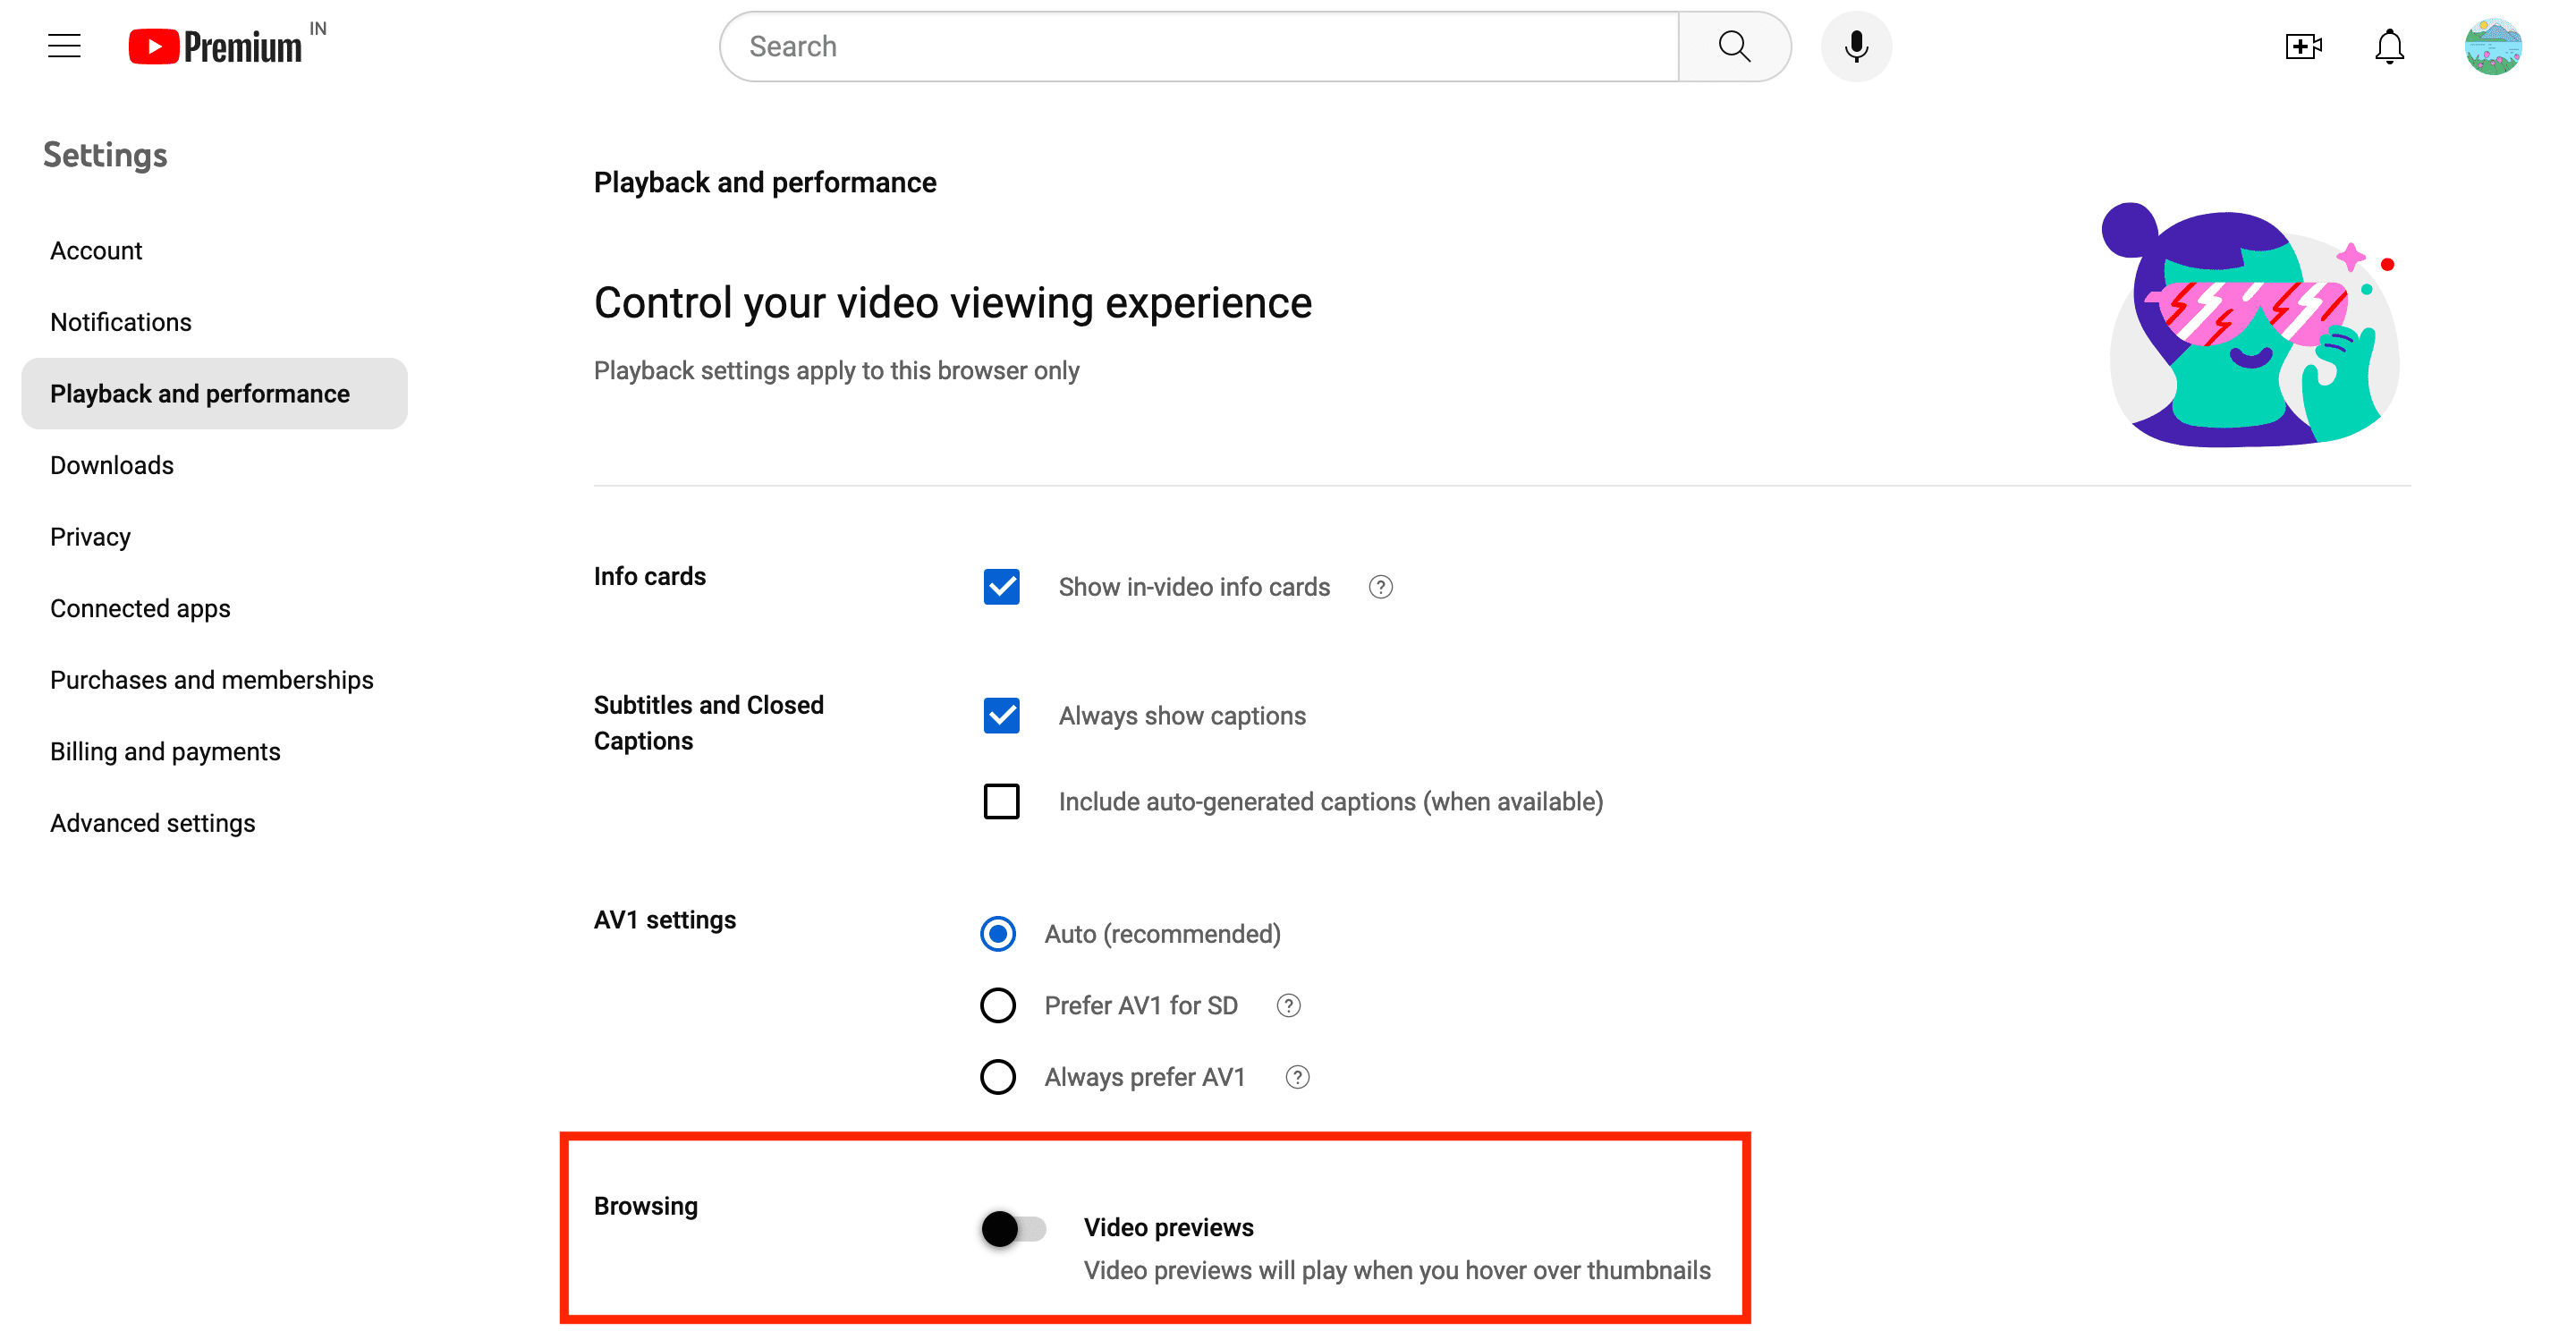 Turn off Video previews for YouTube's website